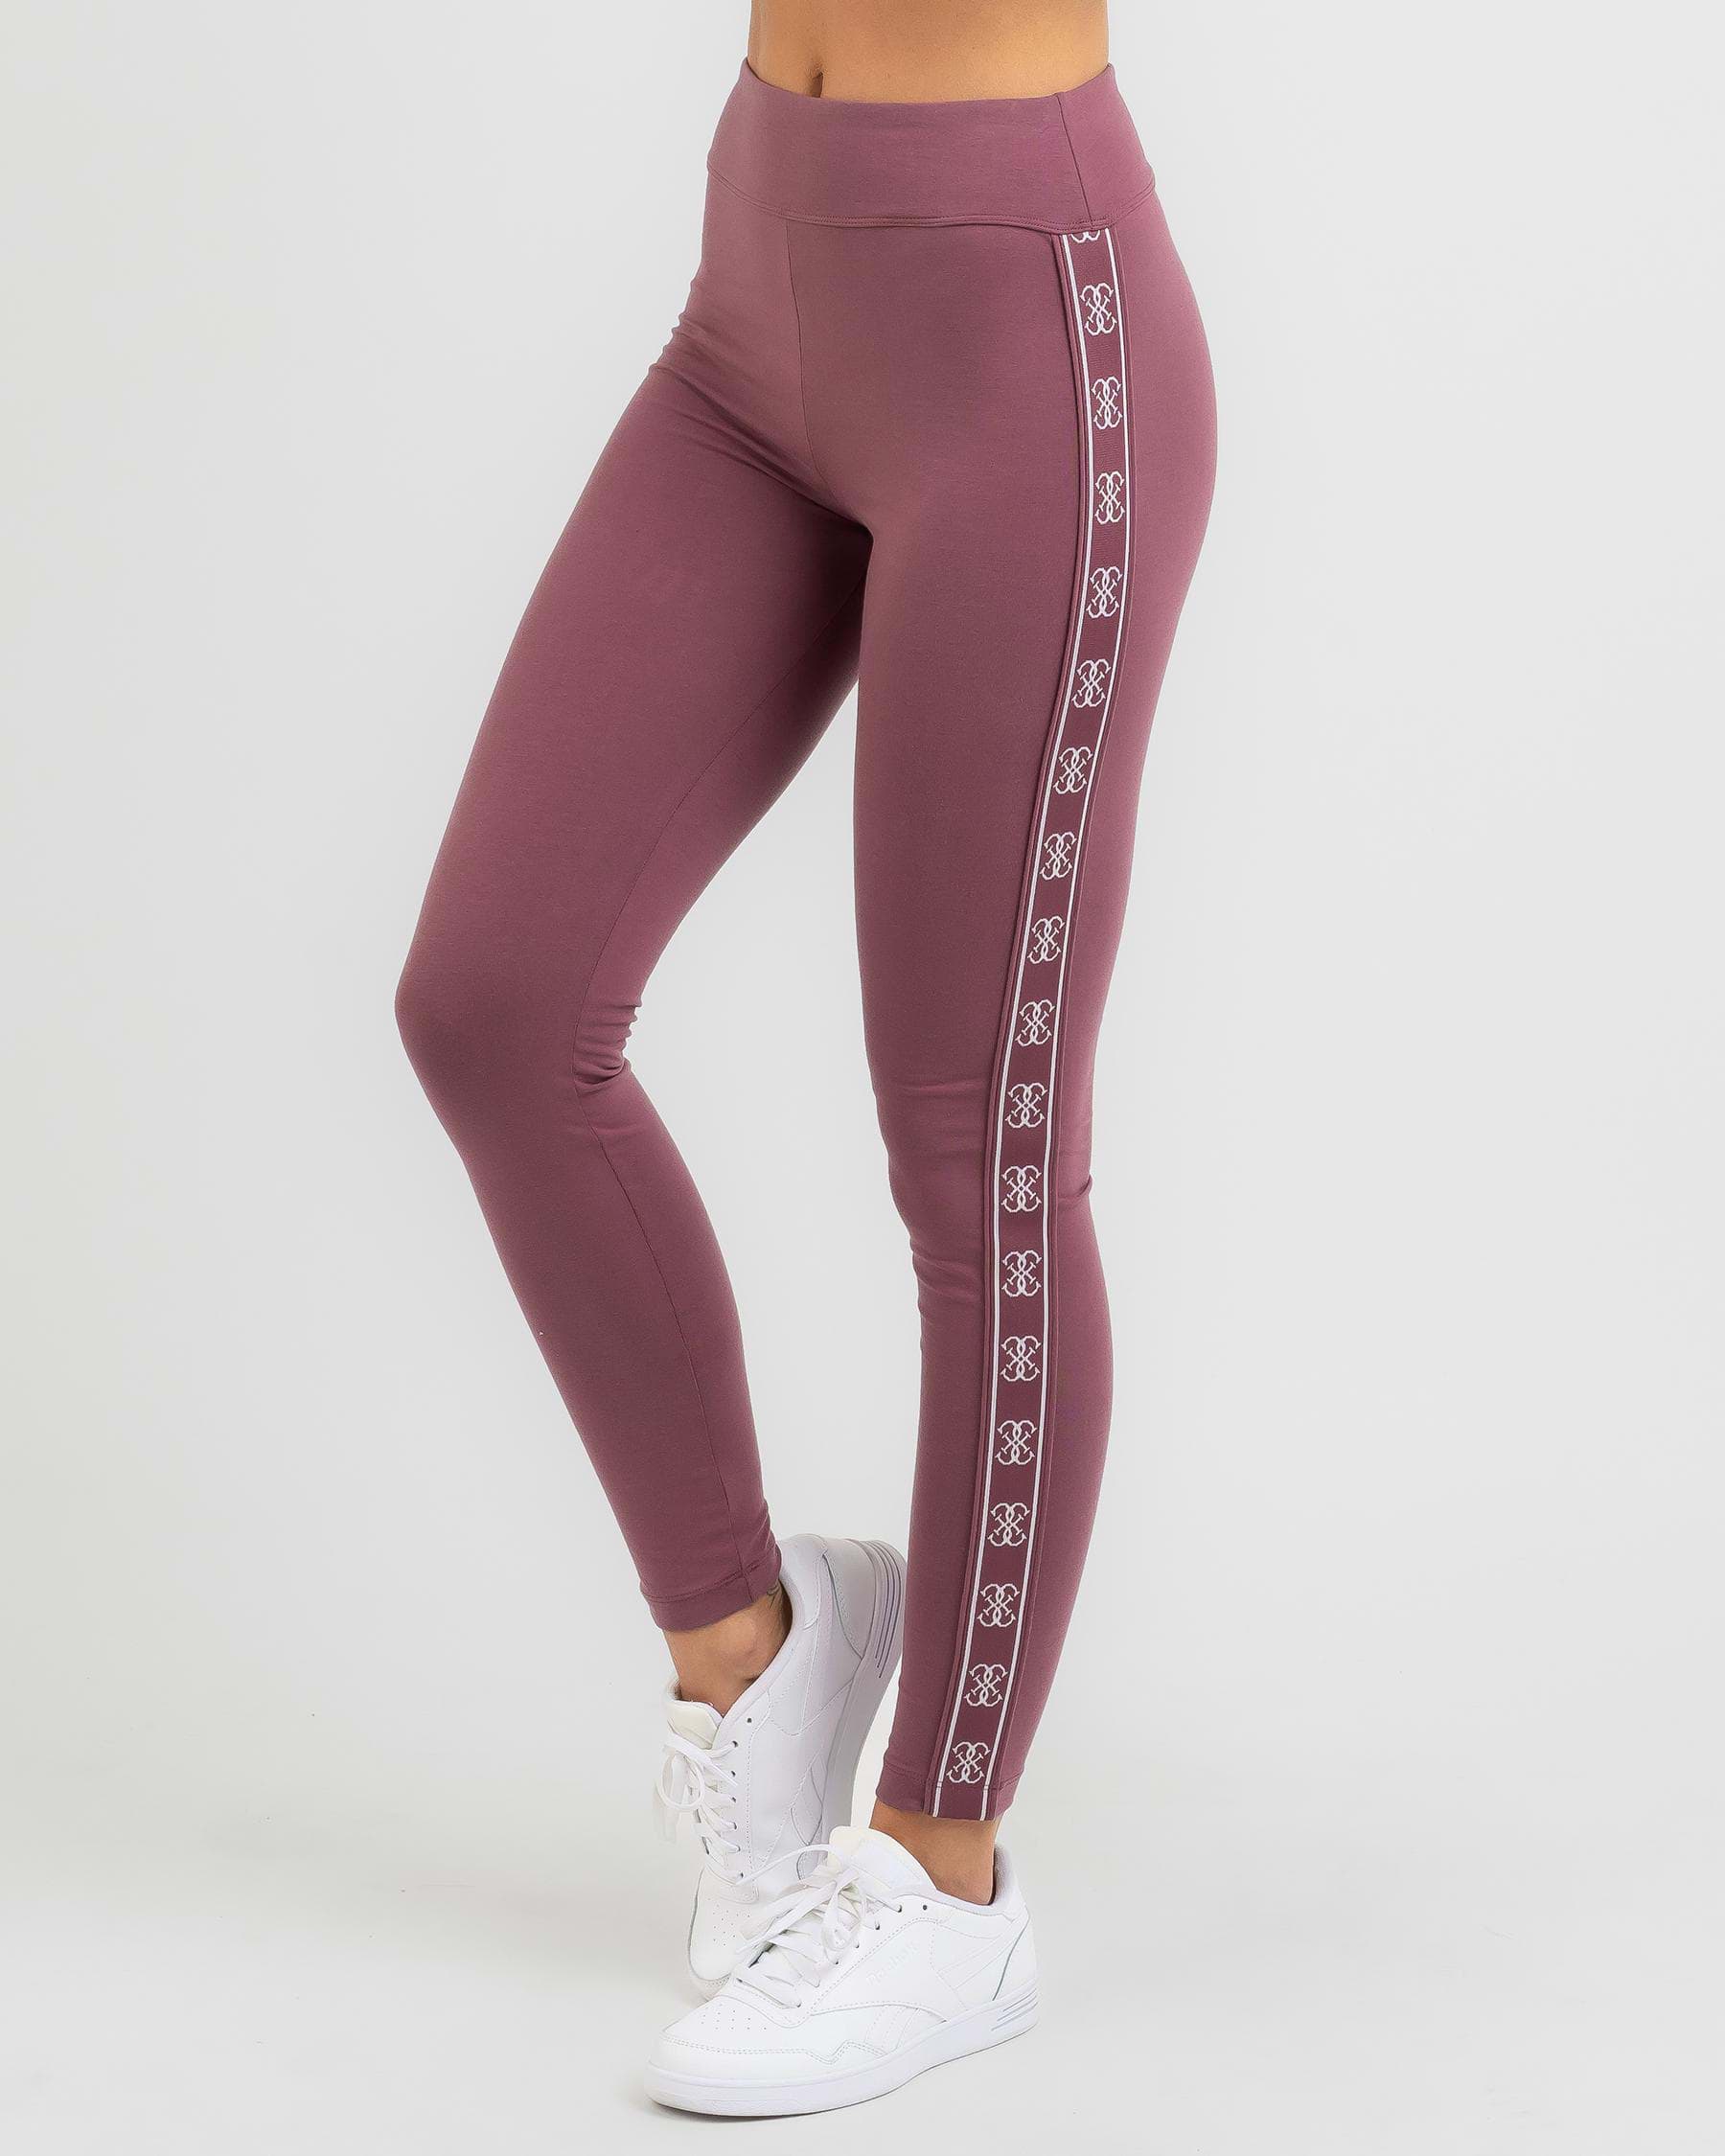 GUESS Doreen 4x4 Leggings In Wine Cellar - FREE* Shipping & Easy Returns -  City Beach United States